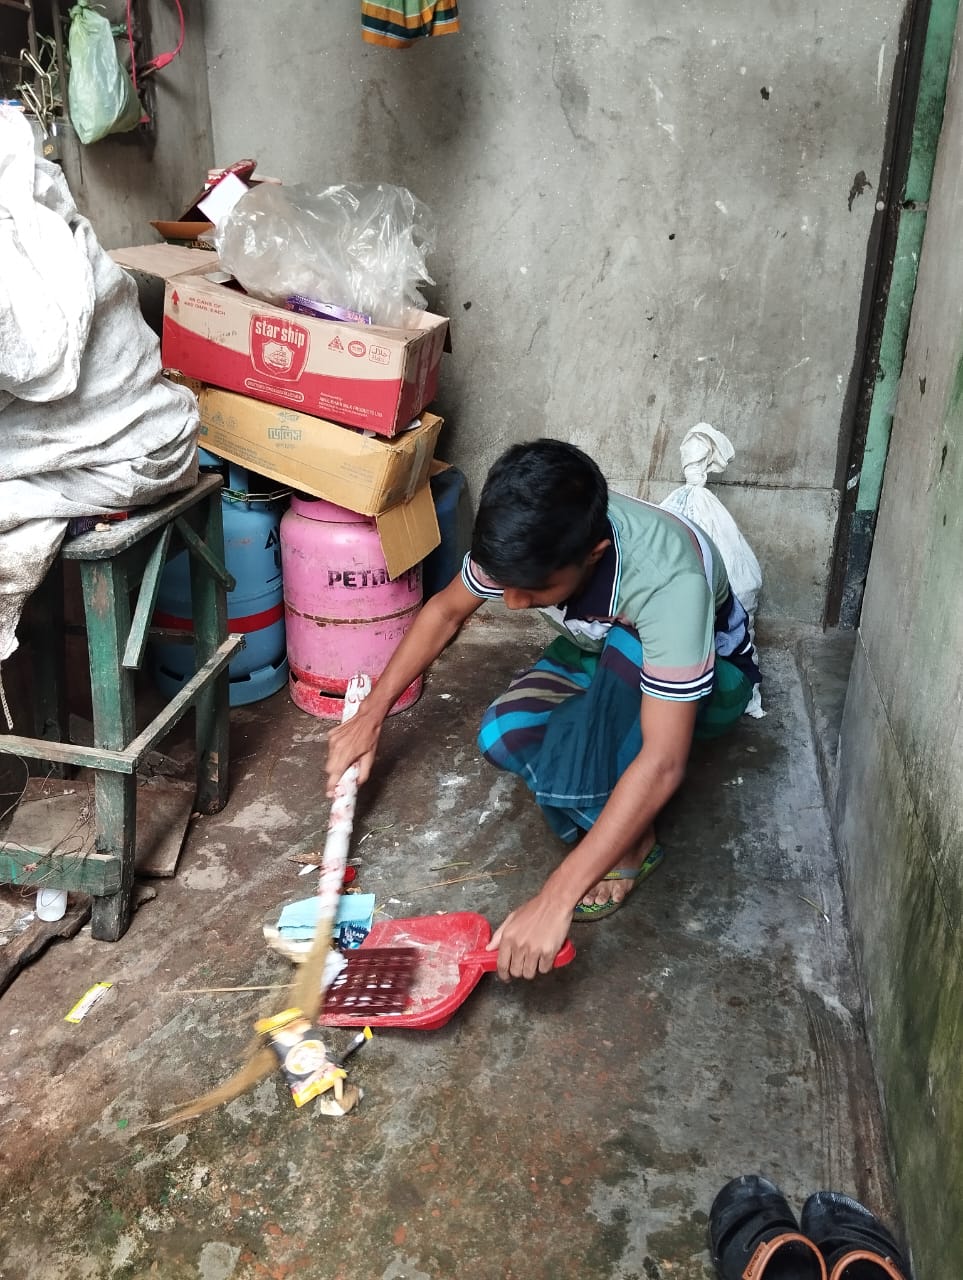 Akash Cleaning his neighborhood to Prevent Dengue